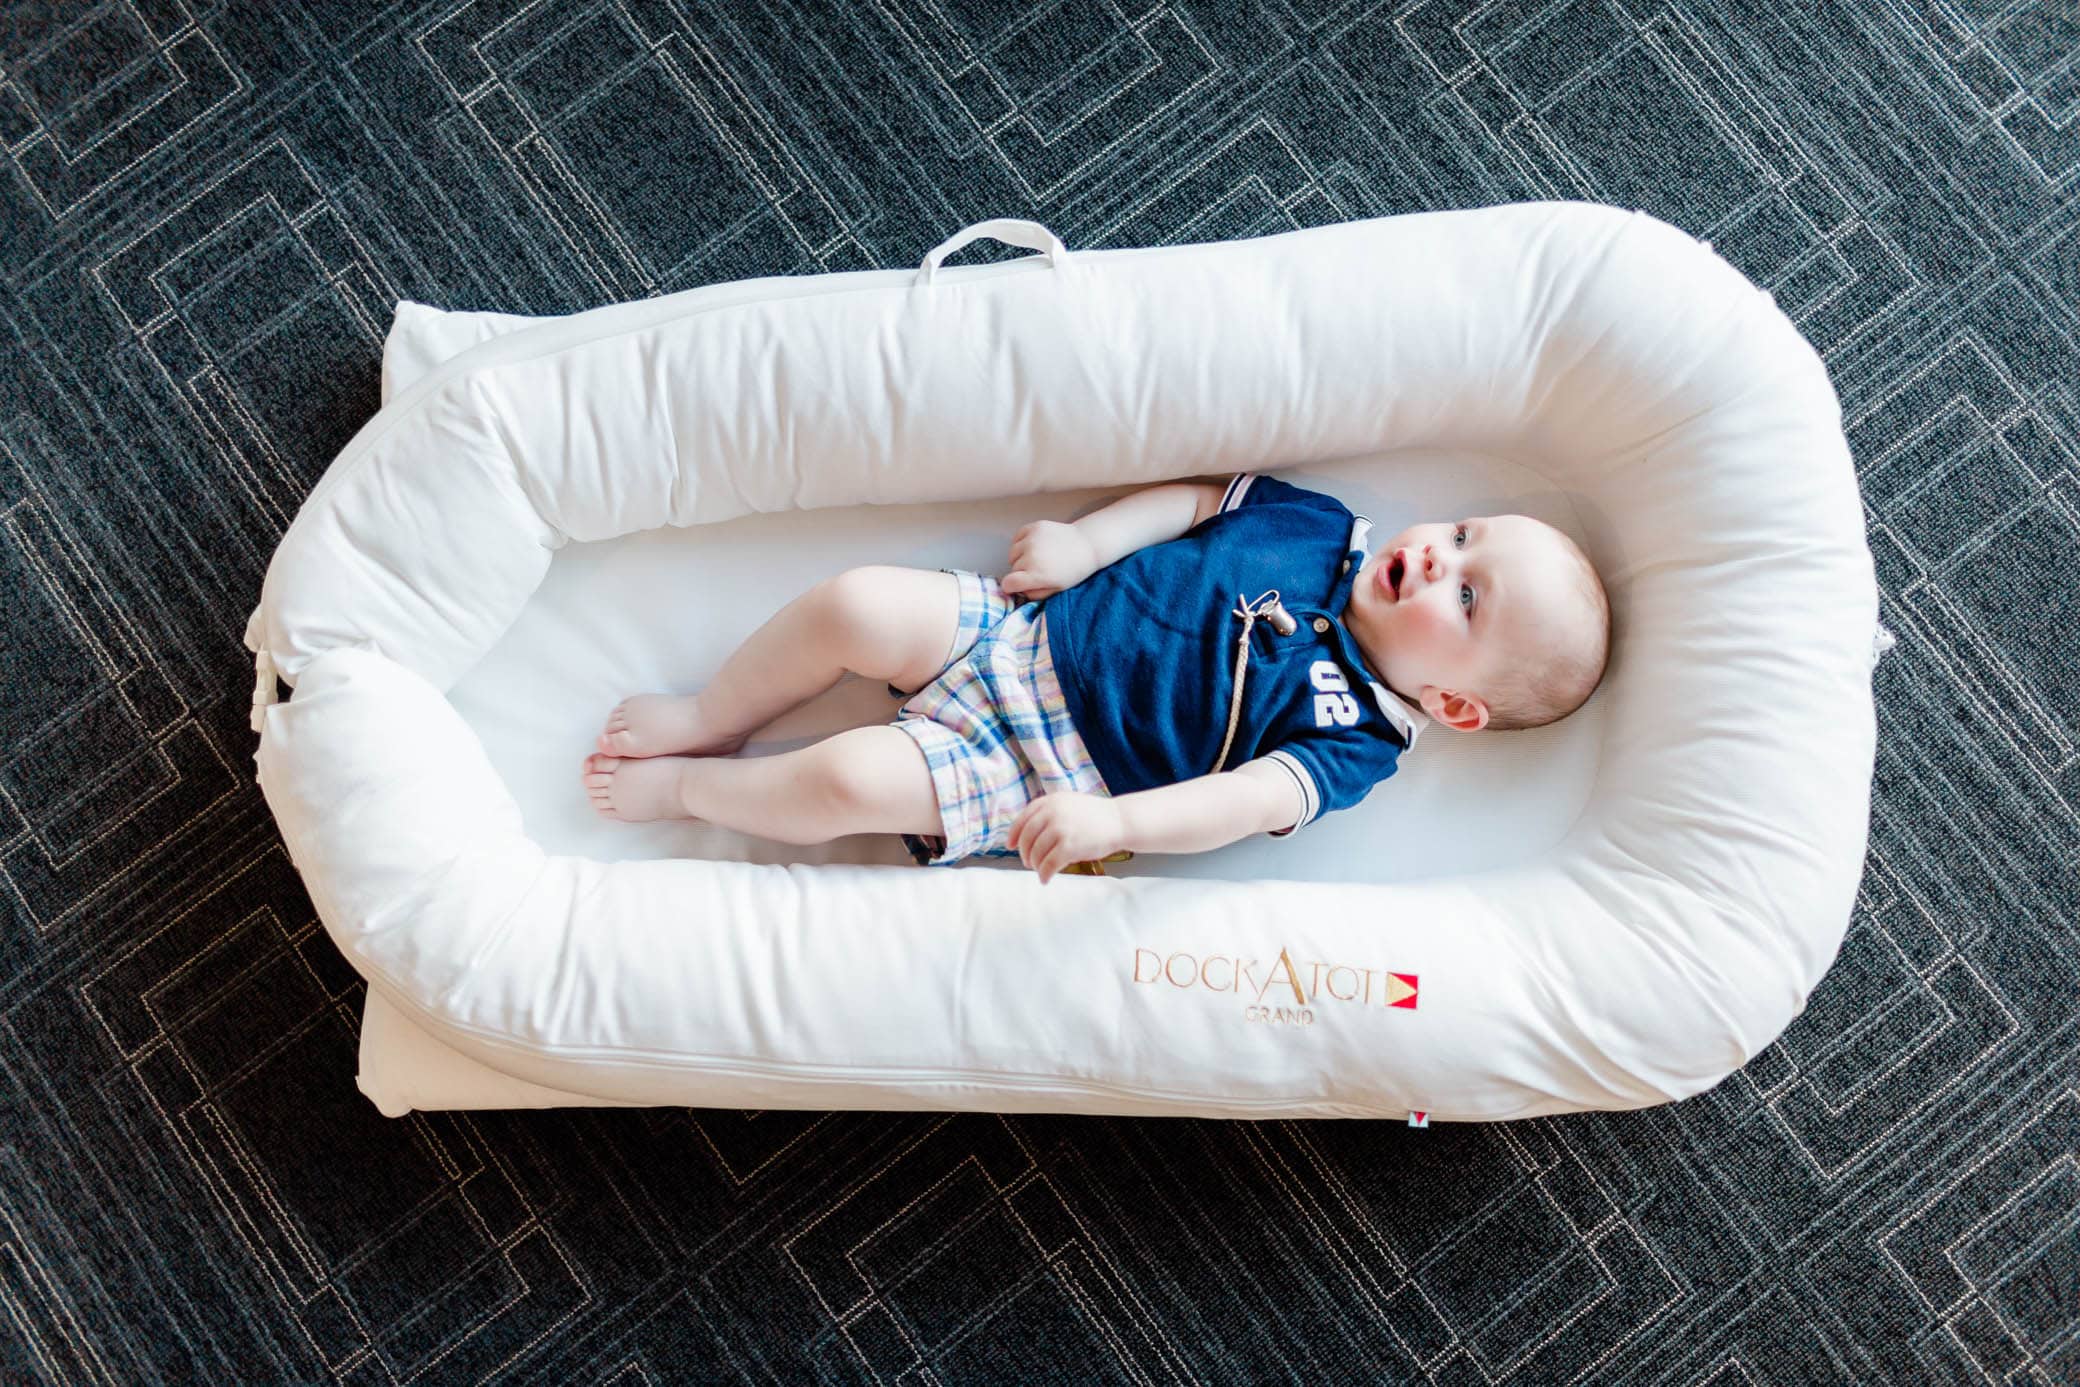 Baby Loungers and Sleep: Pros & Cons